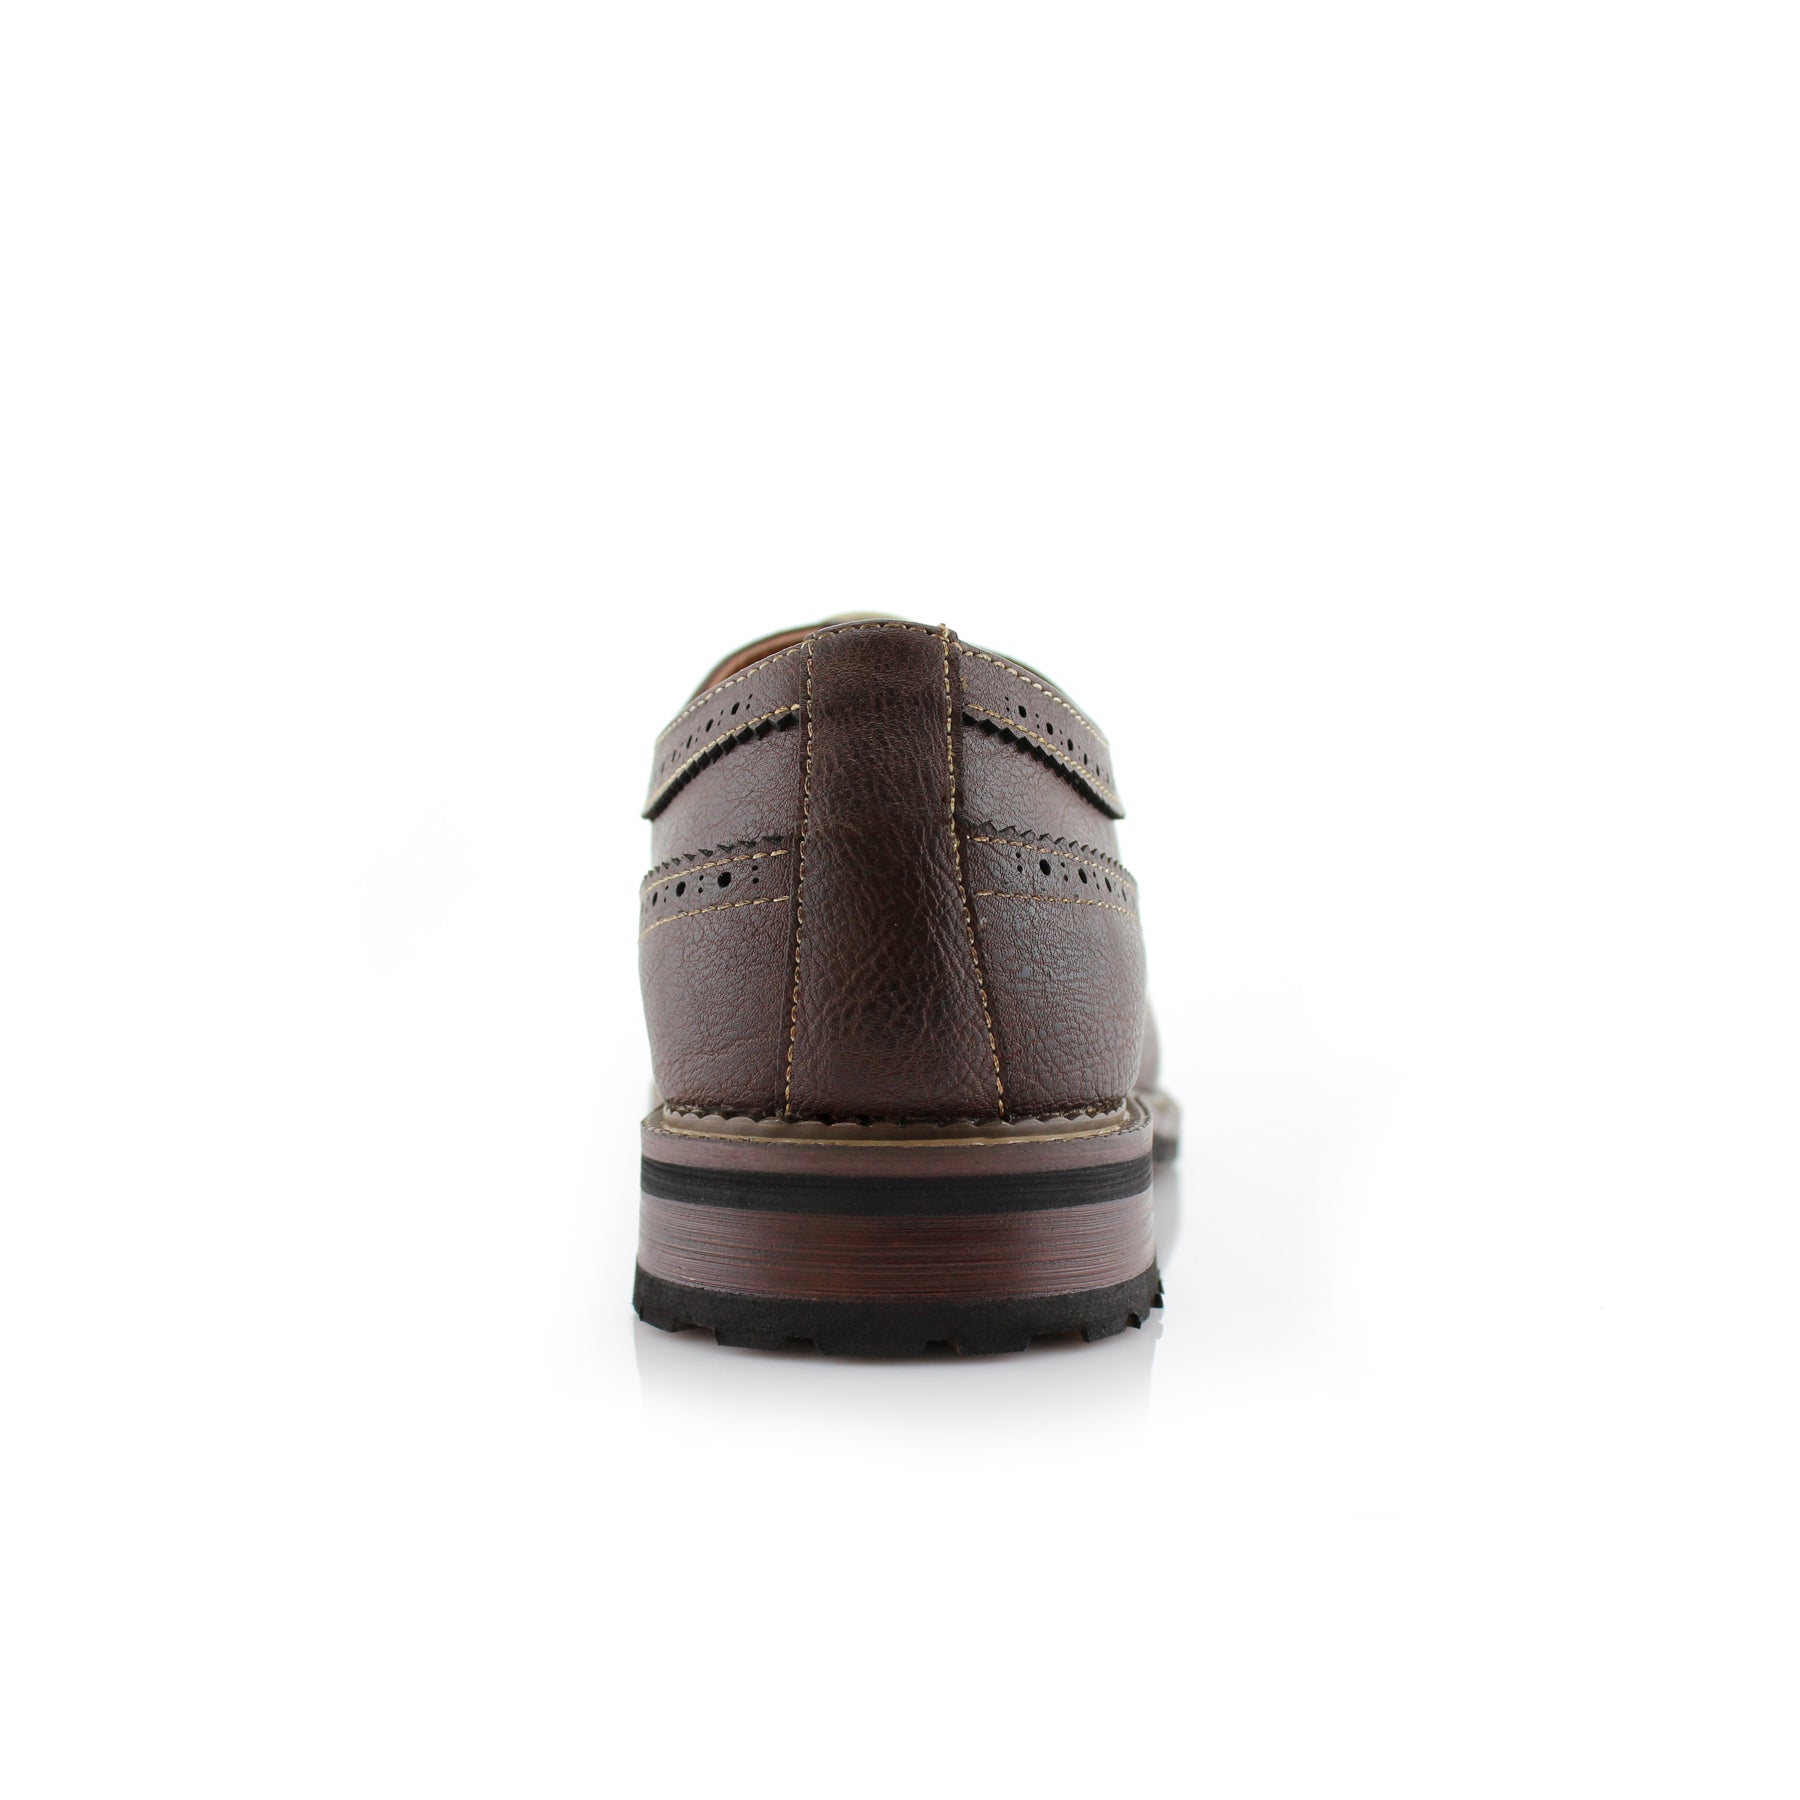 Longwing Brogue Derby Shoes | Phillip by Ferro Aldo | Conal Footwear | Back Angle View